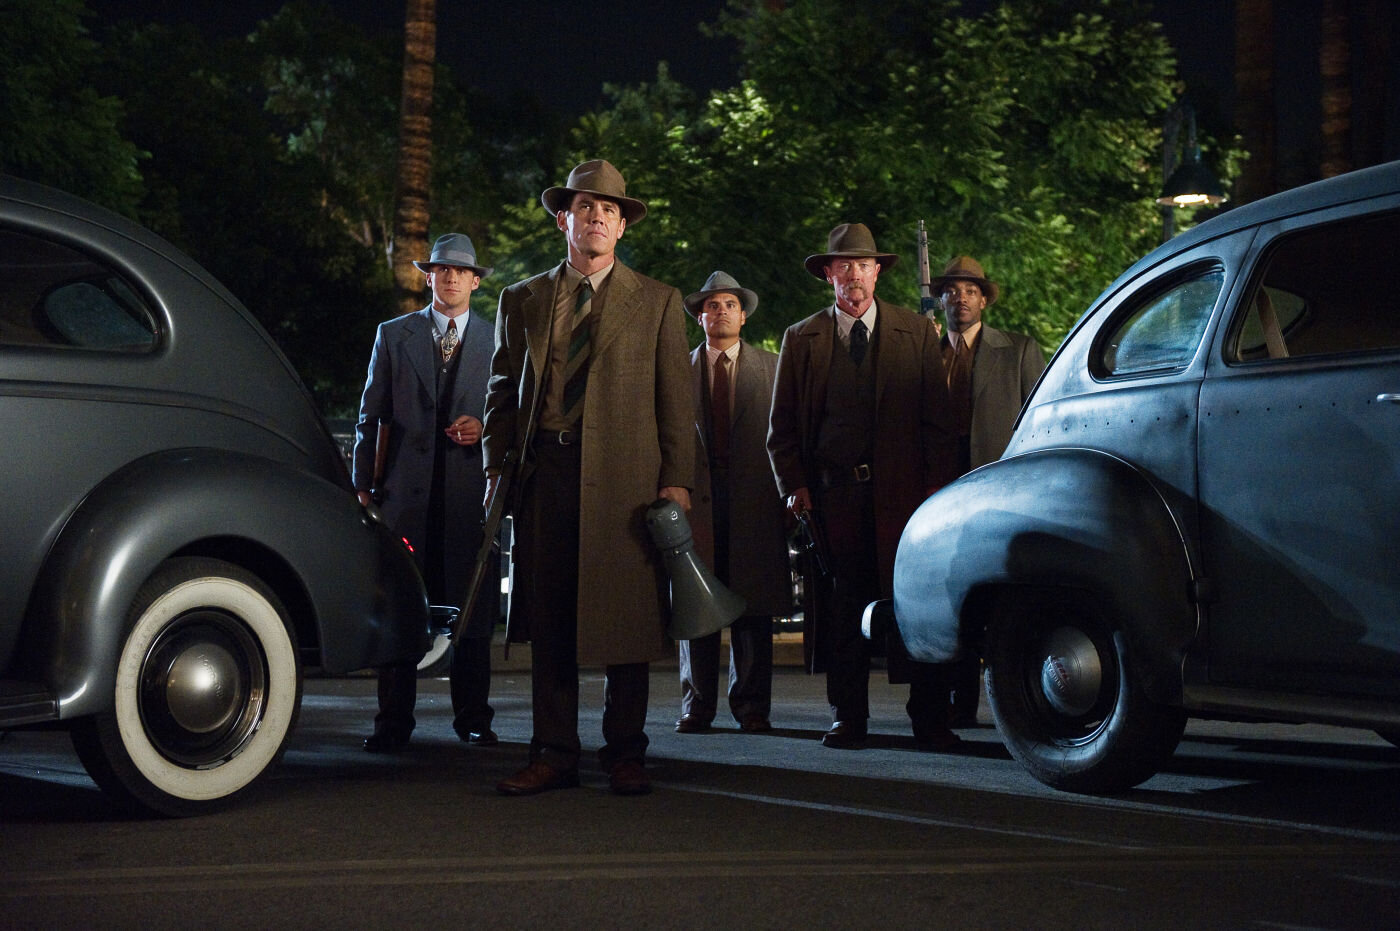 Movie Review  Gangster Squad: Stylish shoot'em-up fires blanks